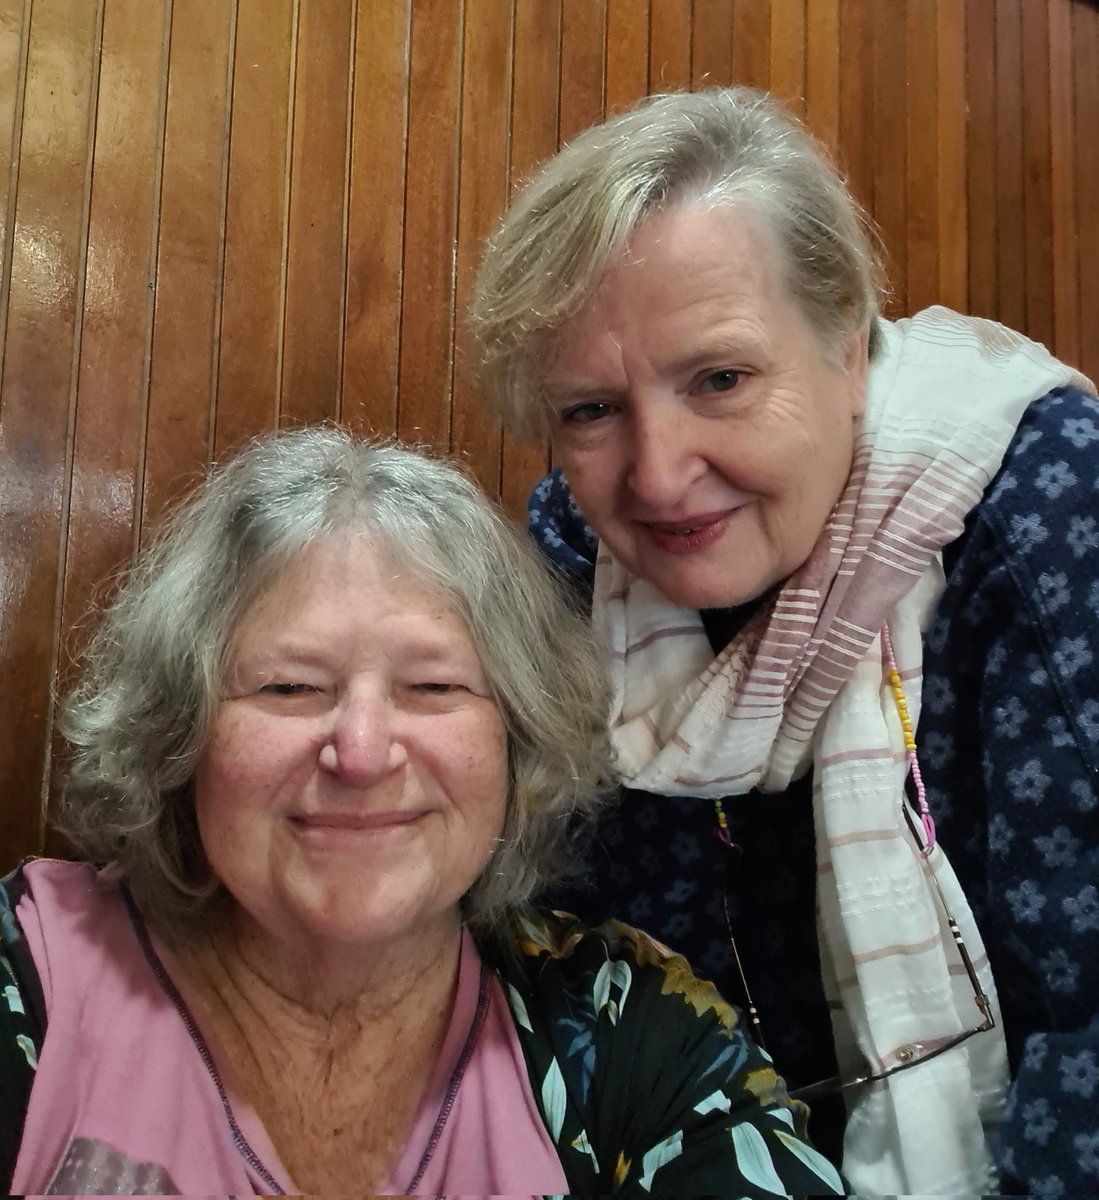 Authors galore at #BlownAwaybybooks at Fishhoek Library today. Here's me with loyal @PennyHaw (a multi-times #Bloomer event attendee) & with @MaireFisher (practising being VIPs together for the launch of #Motherbliss next week @JoanneHichens). Great turnout @CathyParkKelly1